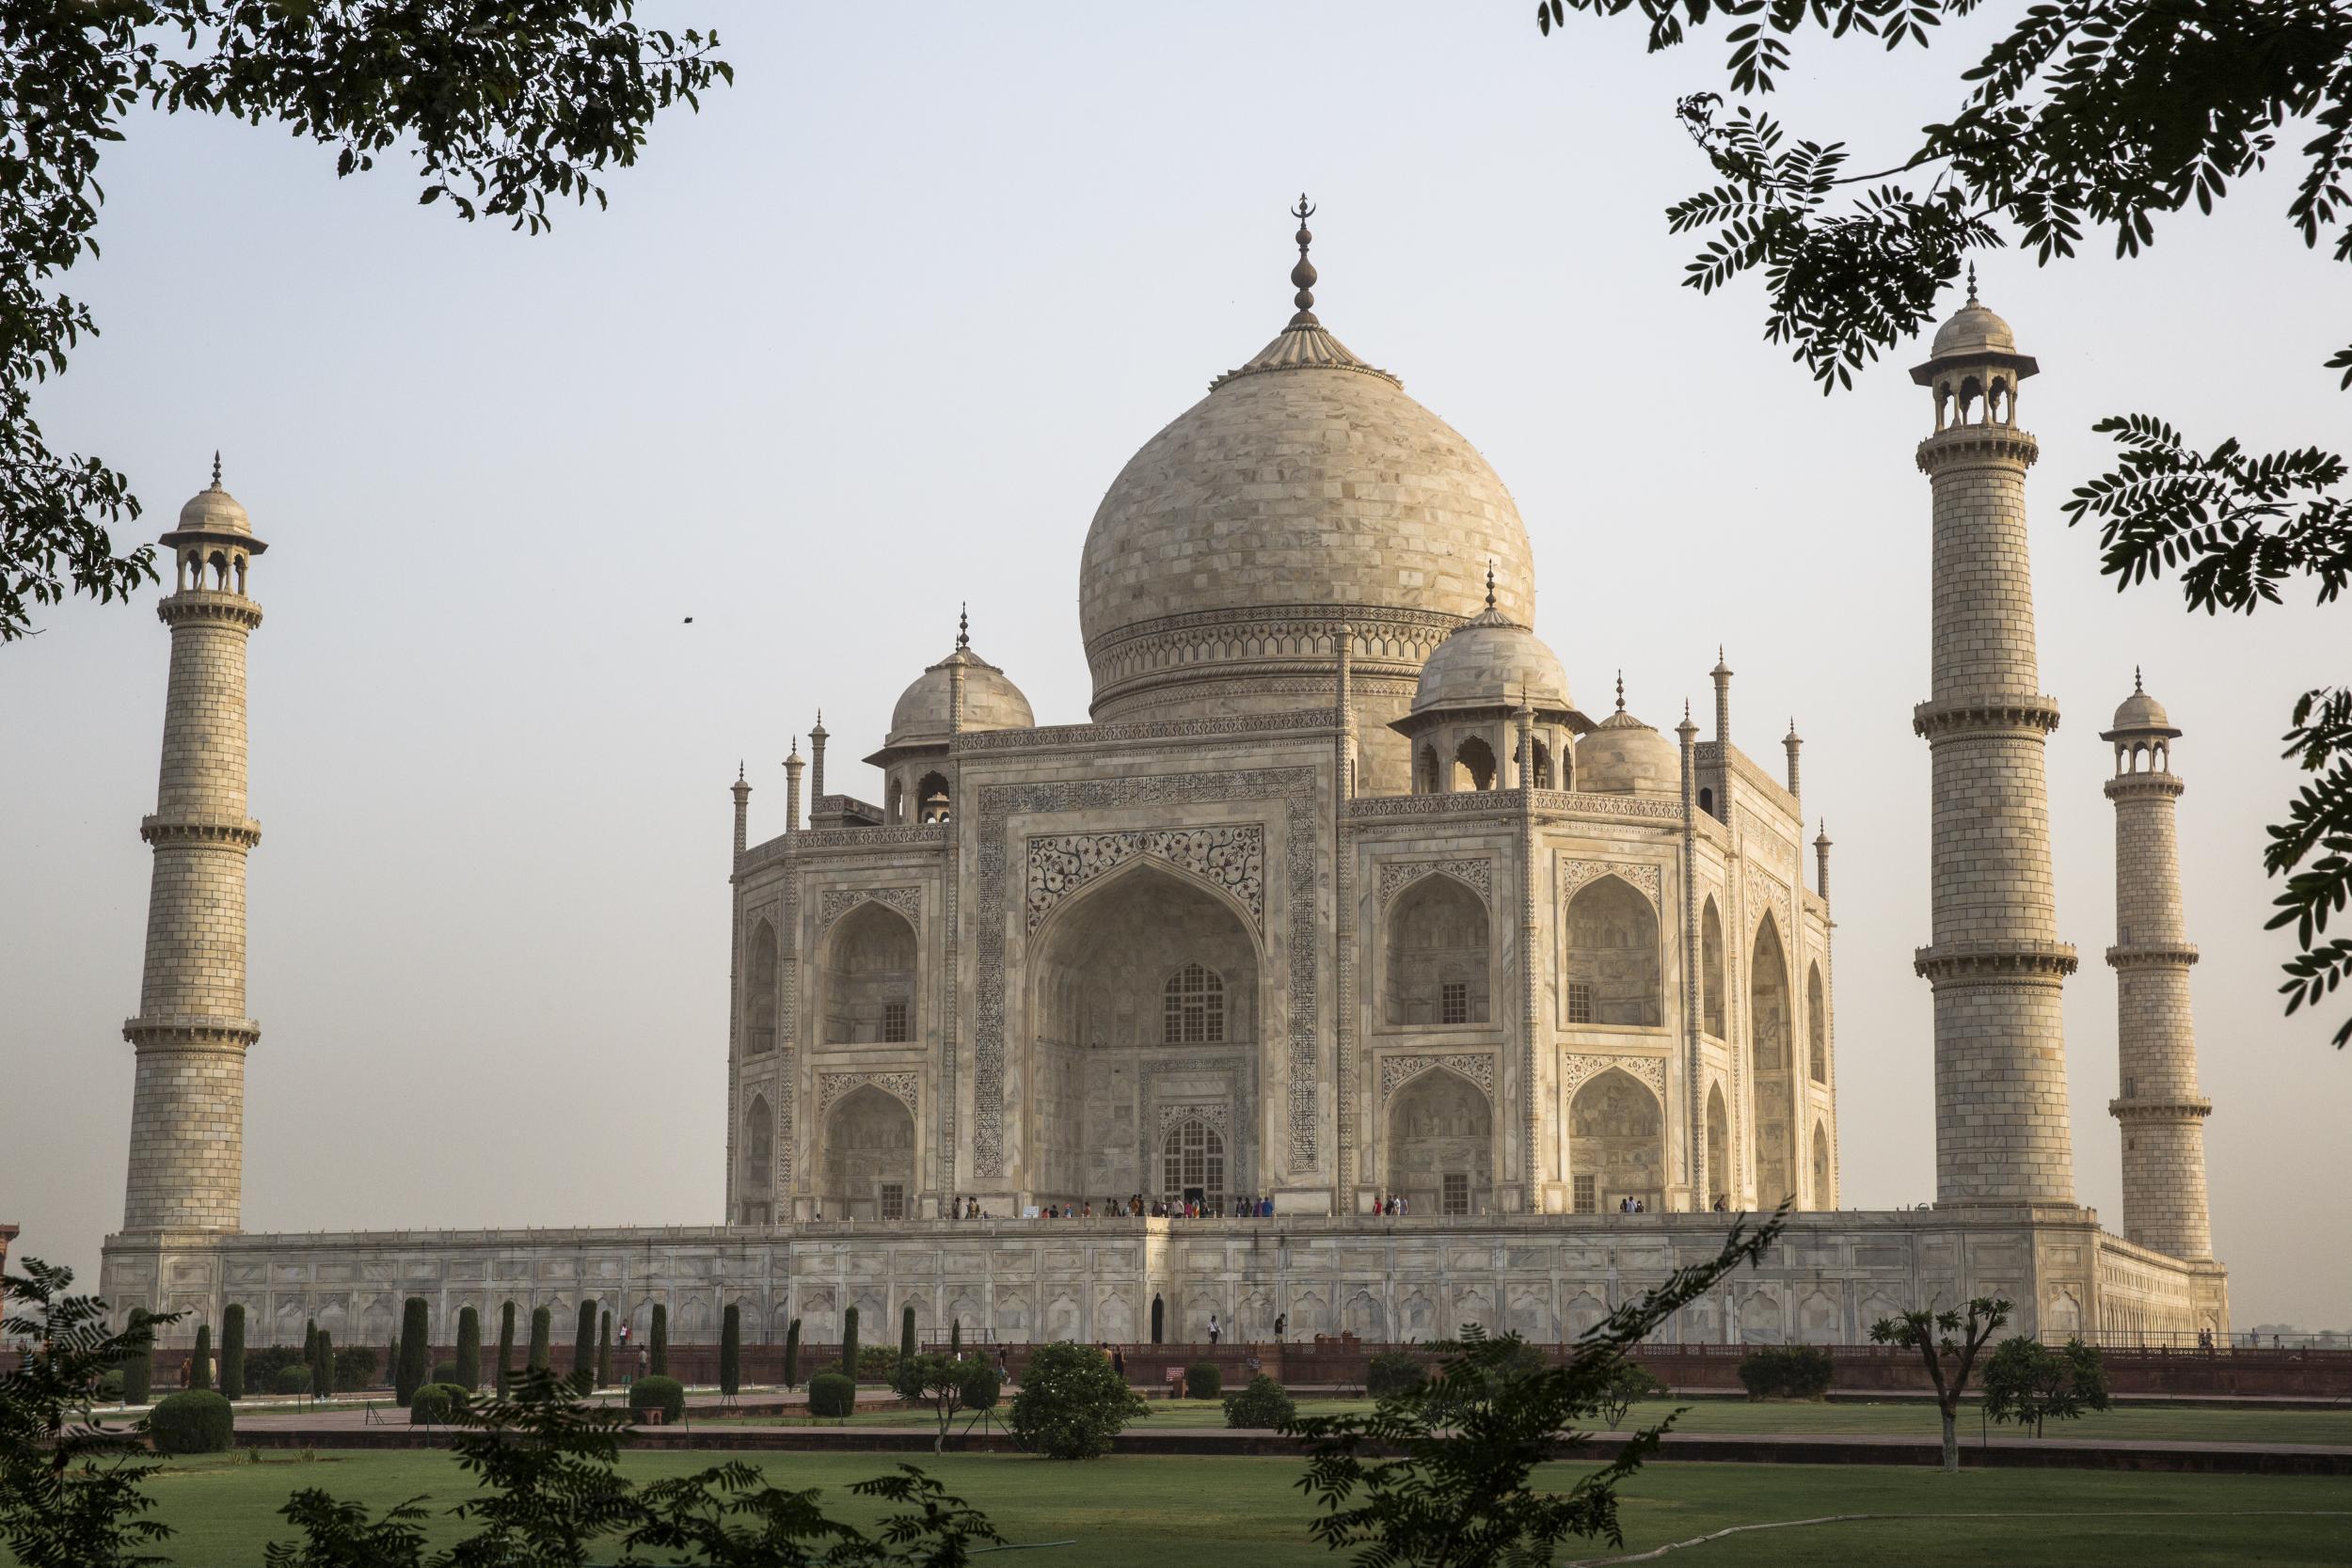 The Taj Mahal in Agra, India, is a worthy wonder – but be sure to visit in the right weather